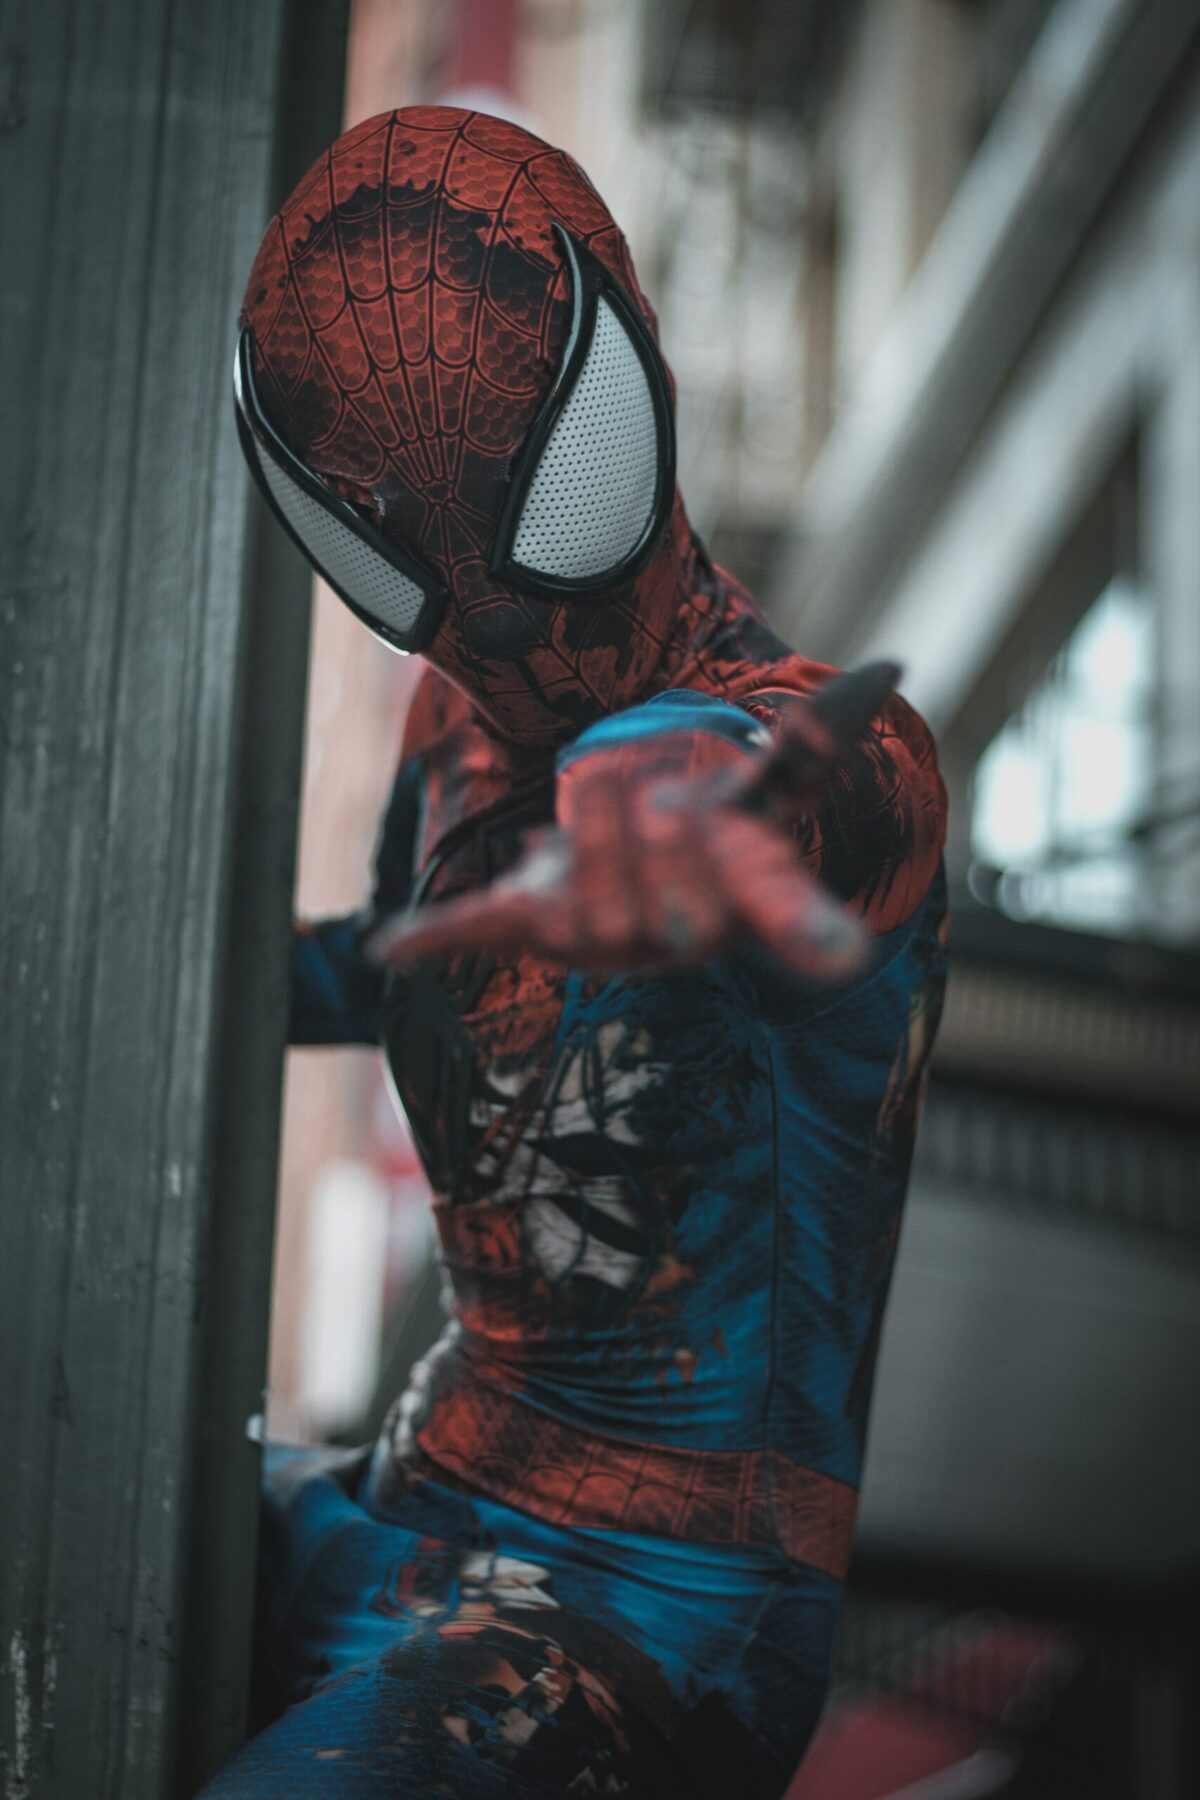 Halloween costumes, check out or list, including spider man